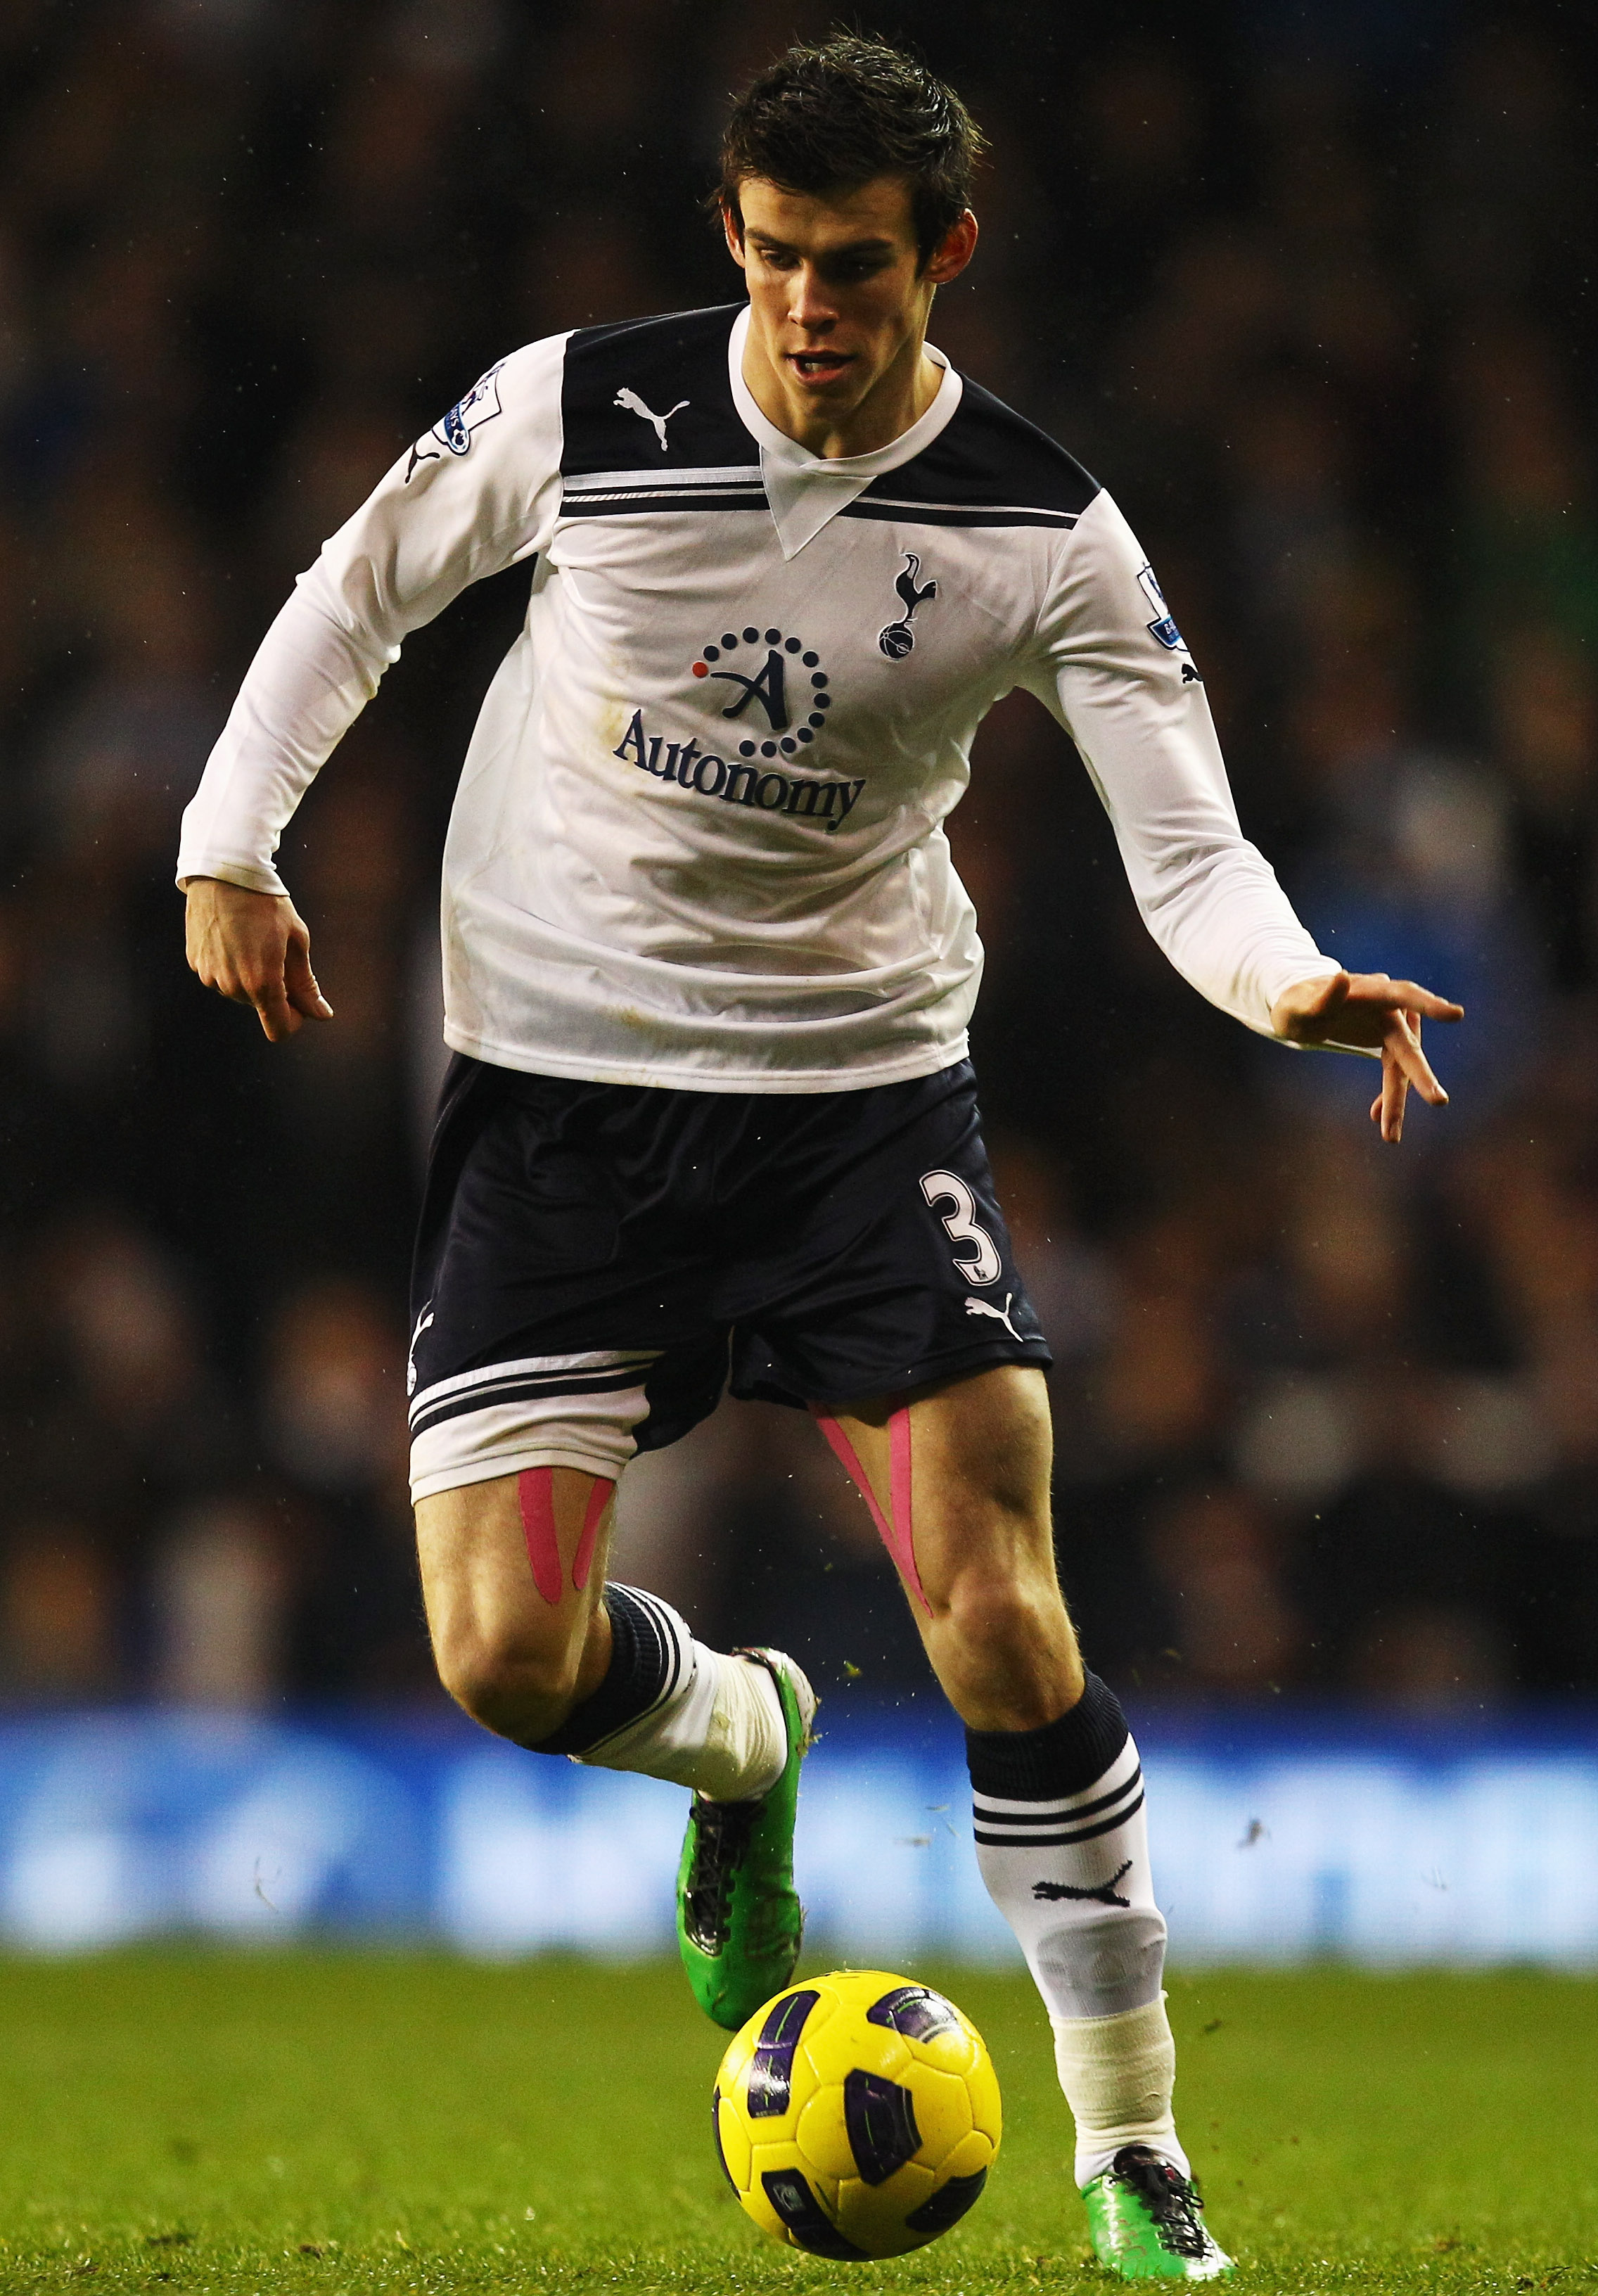 LONDON, UNITED KINGDOM - JANUARY 01:  Gareth Bale of Tottenham Hotspur runs with the ball during the Barclays Premier League match between Tottenham Hotspur and Fulham at White Hart Lane on January 1, 2011 in London, England.  (Photo by Richard Heathcote/